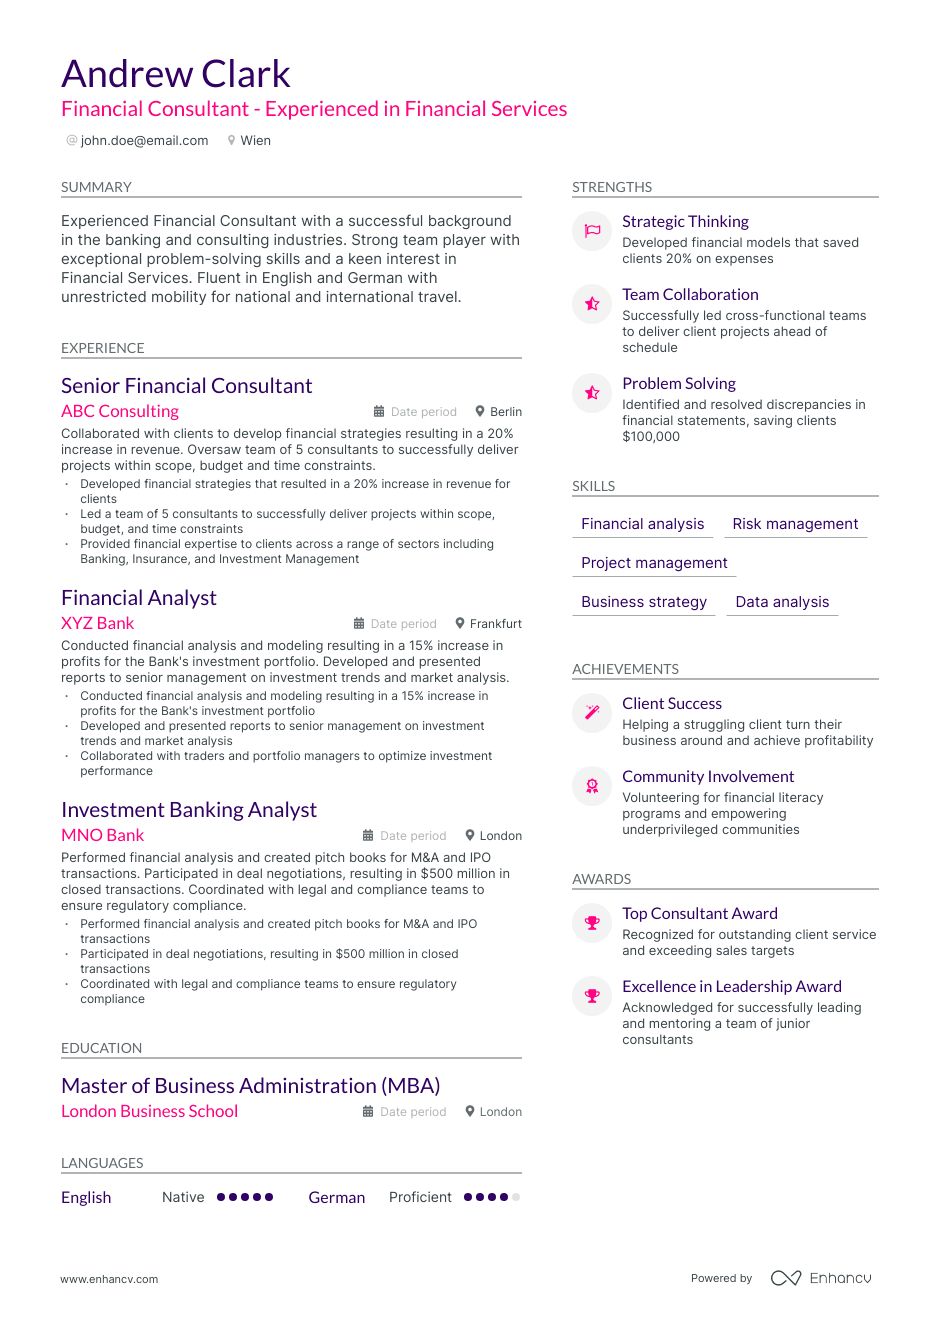 Financial Consultant resume example